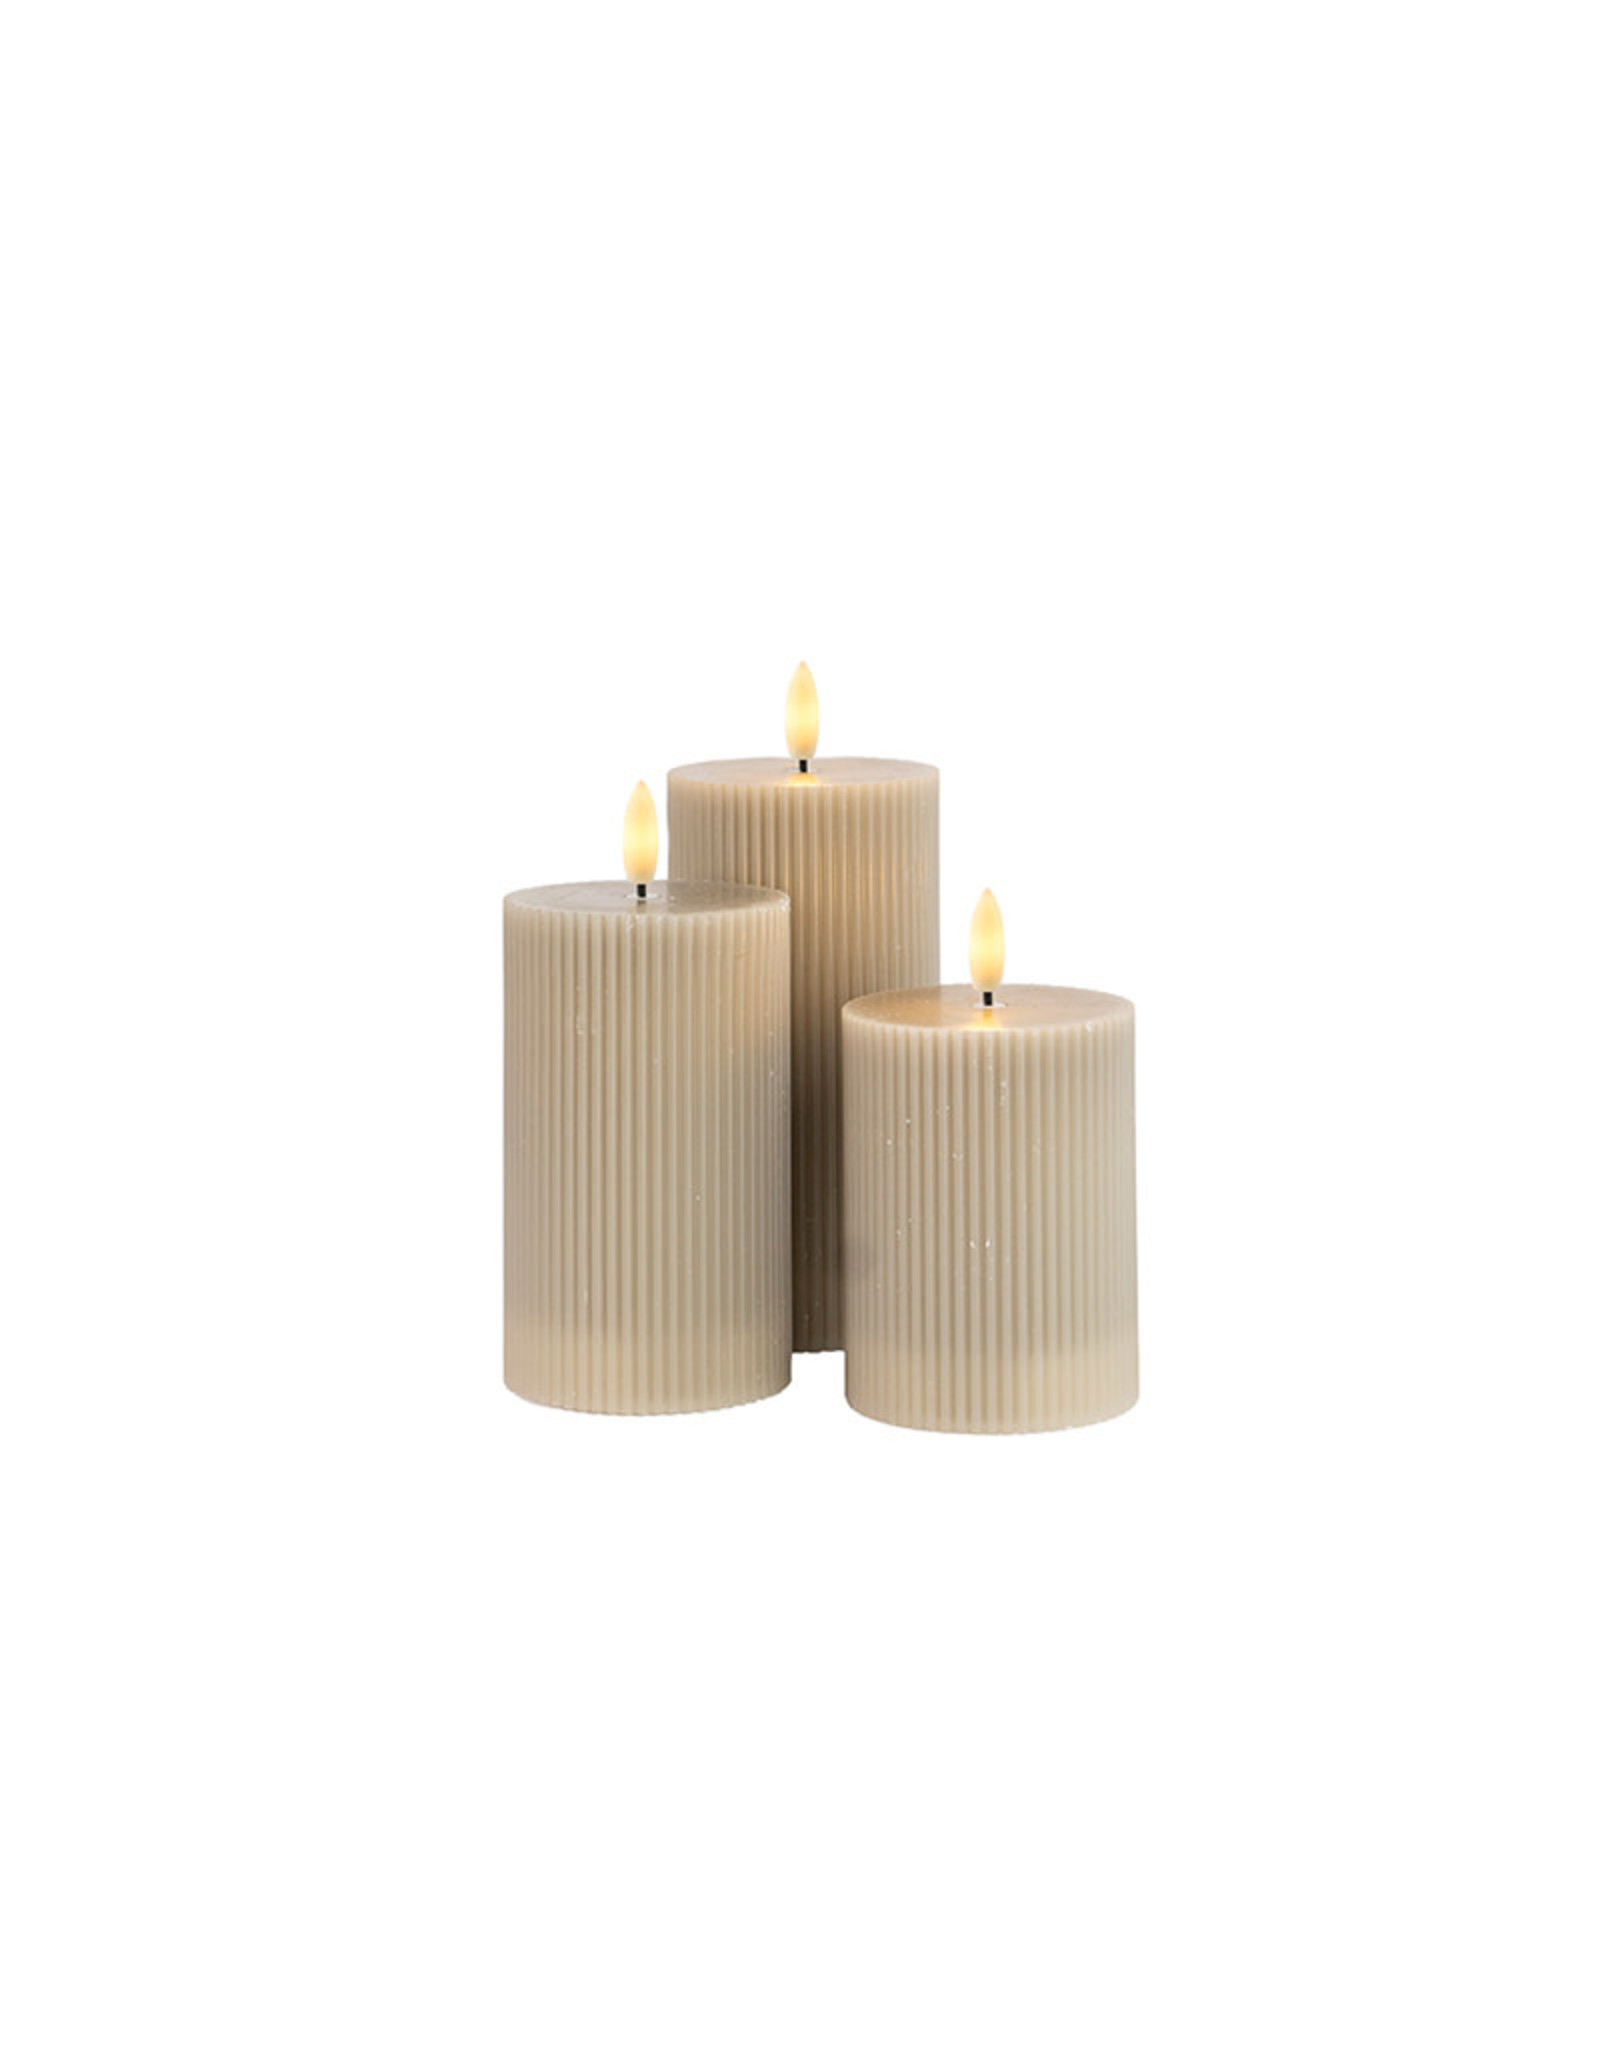 Sirius Smilla Rechargeable Led Candle | Set of 3 | Warm Grey